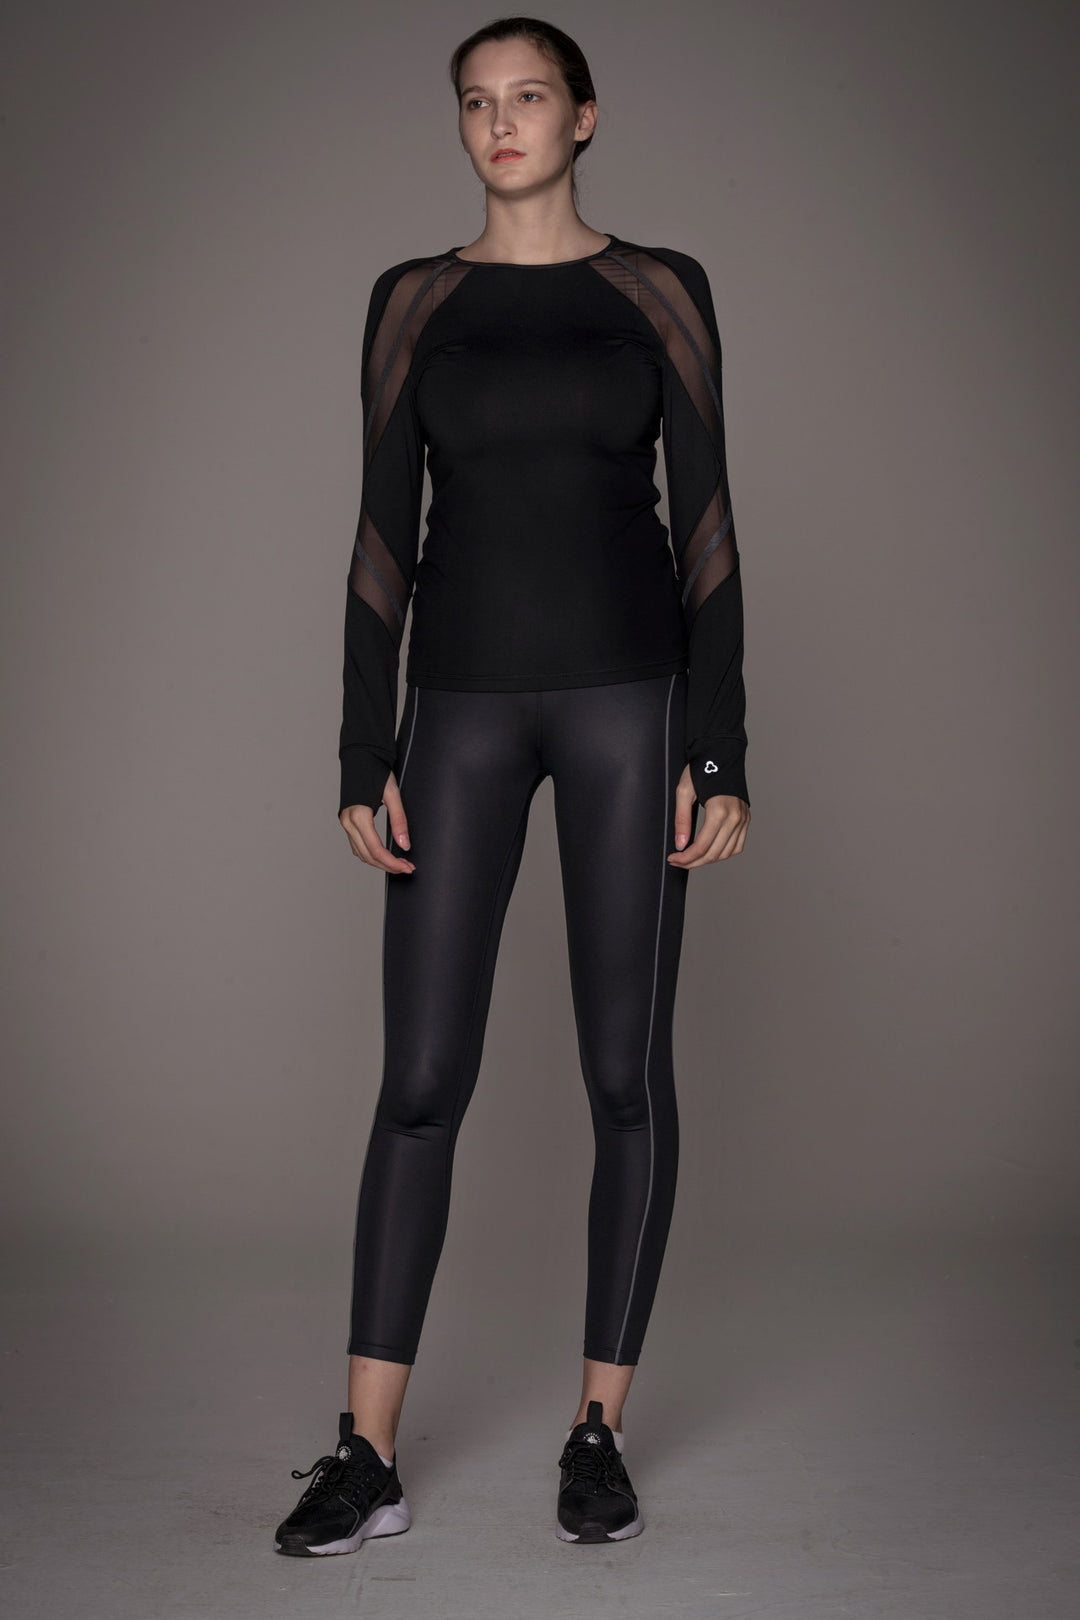 Baden Reflective Running Top | TITIKA Active Couture™